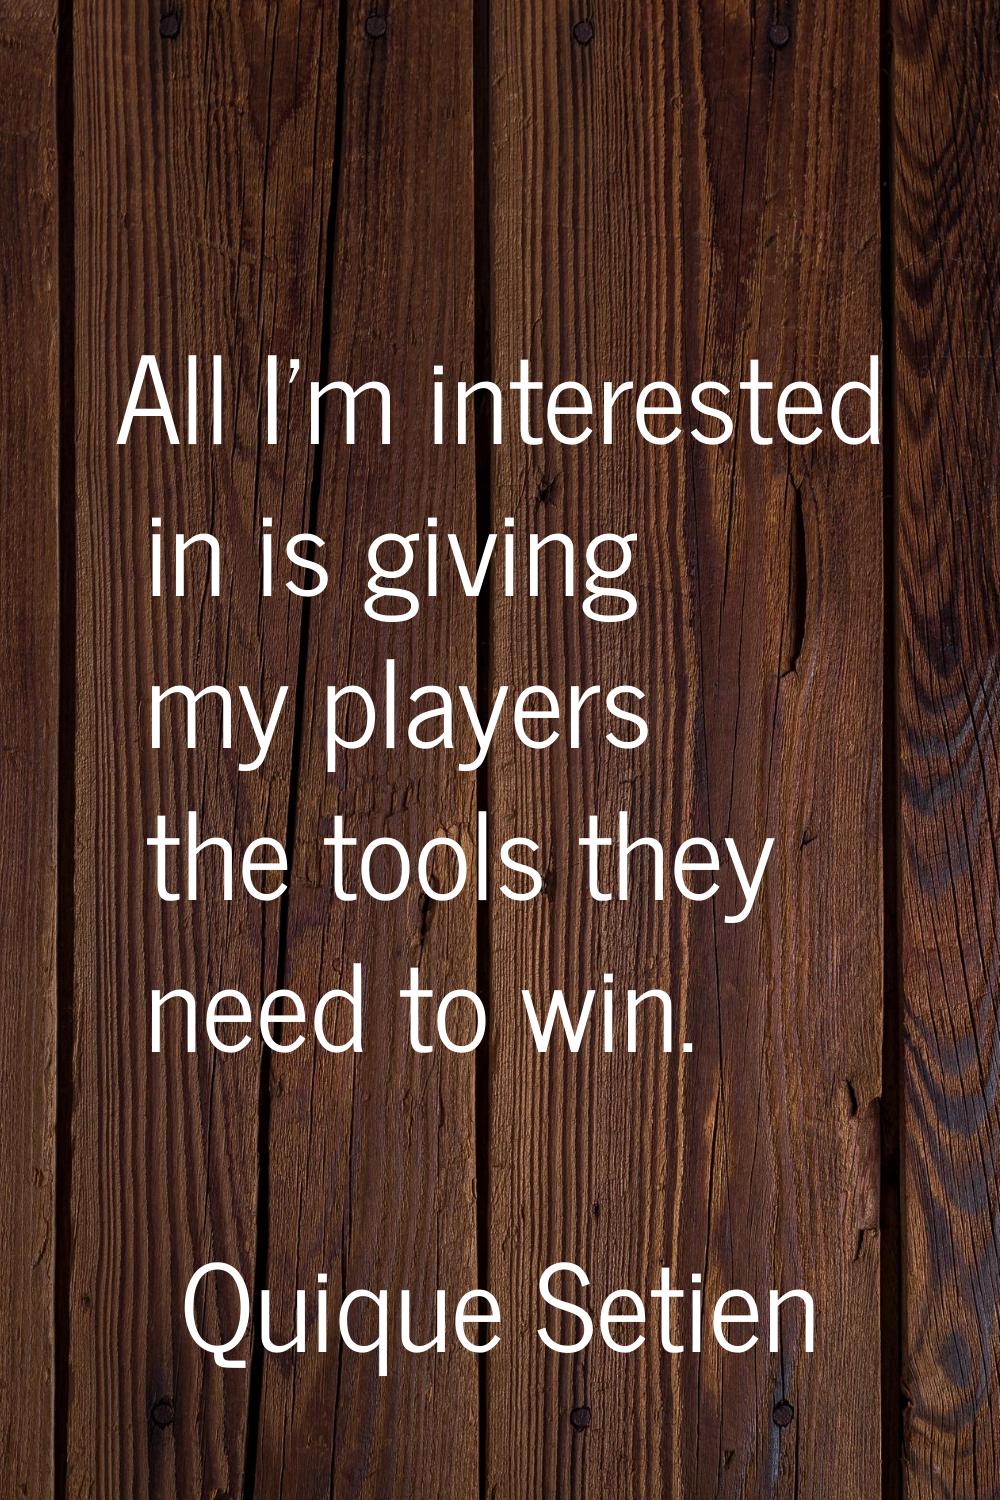 All I'm interested in is giving my players the tools they need to win.